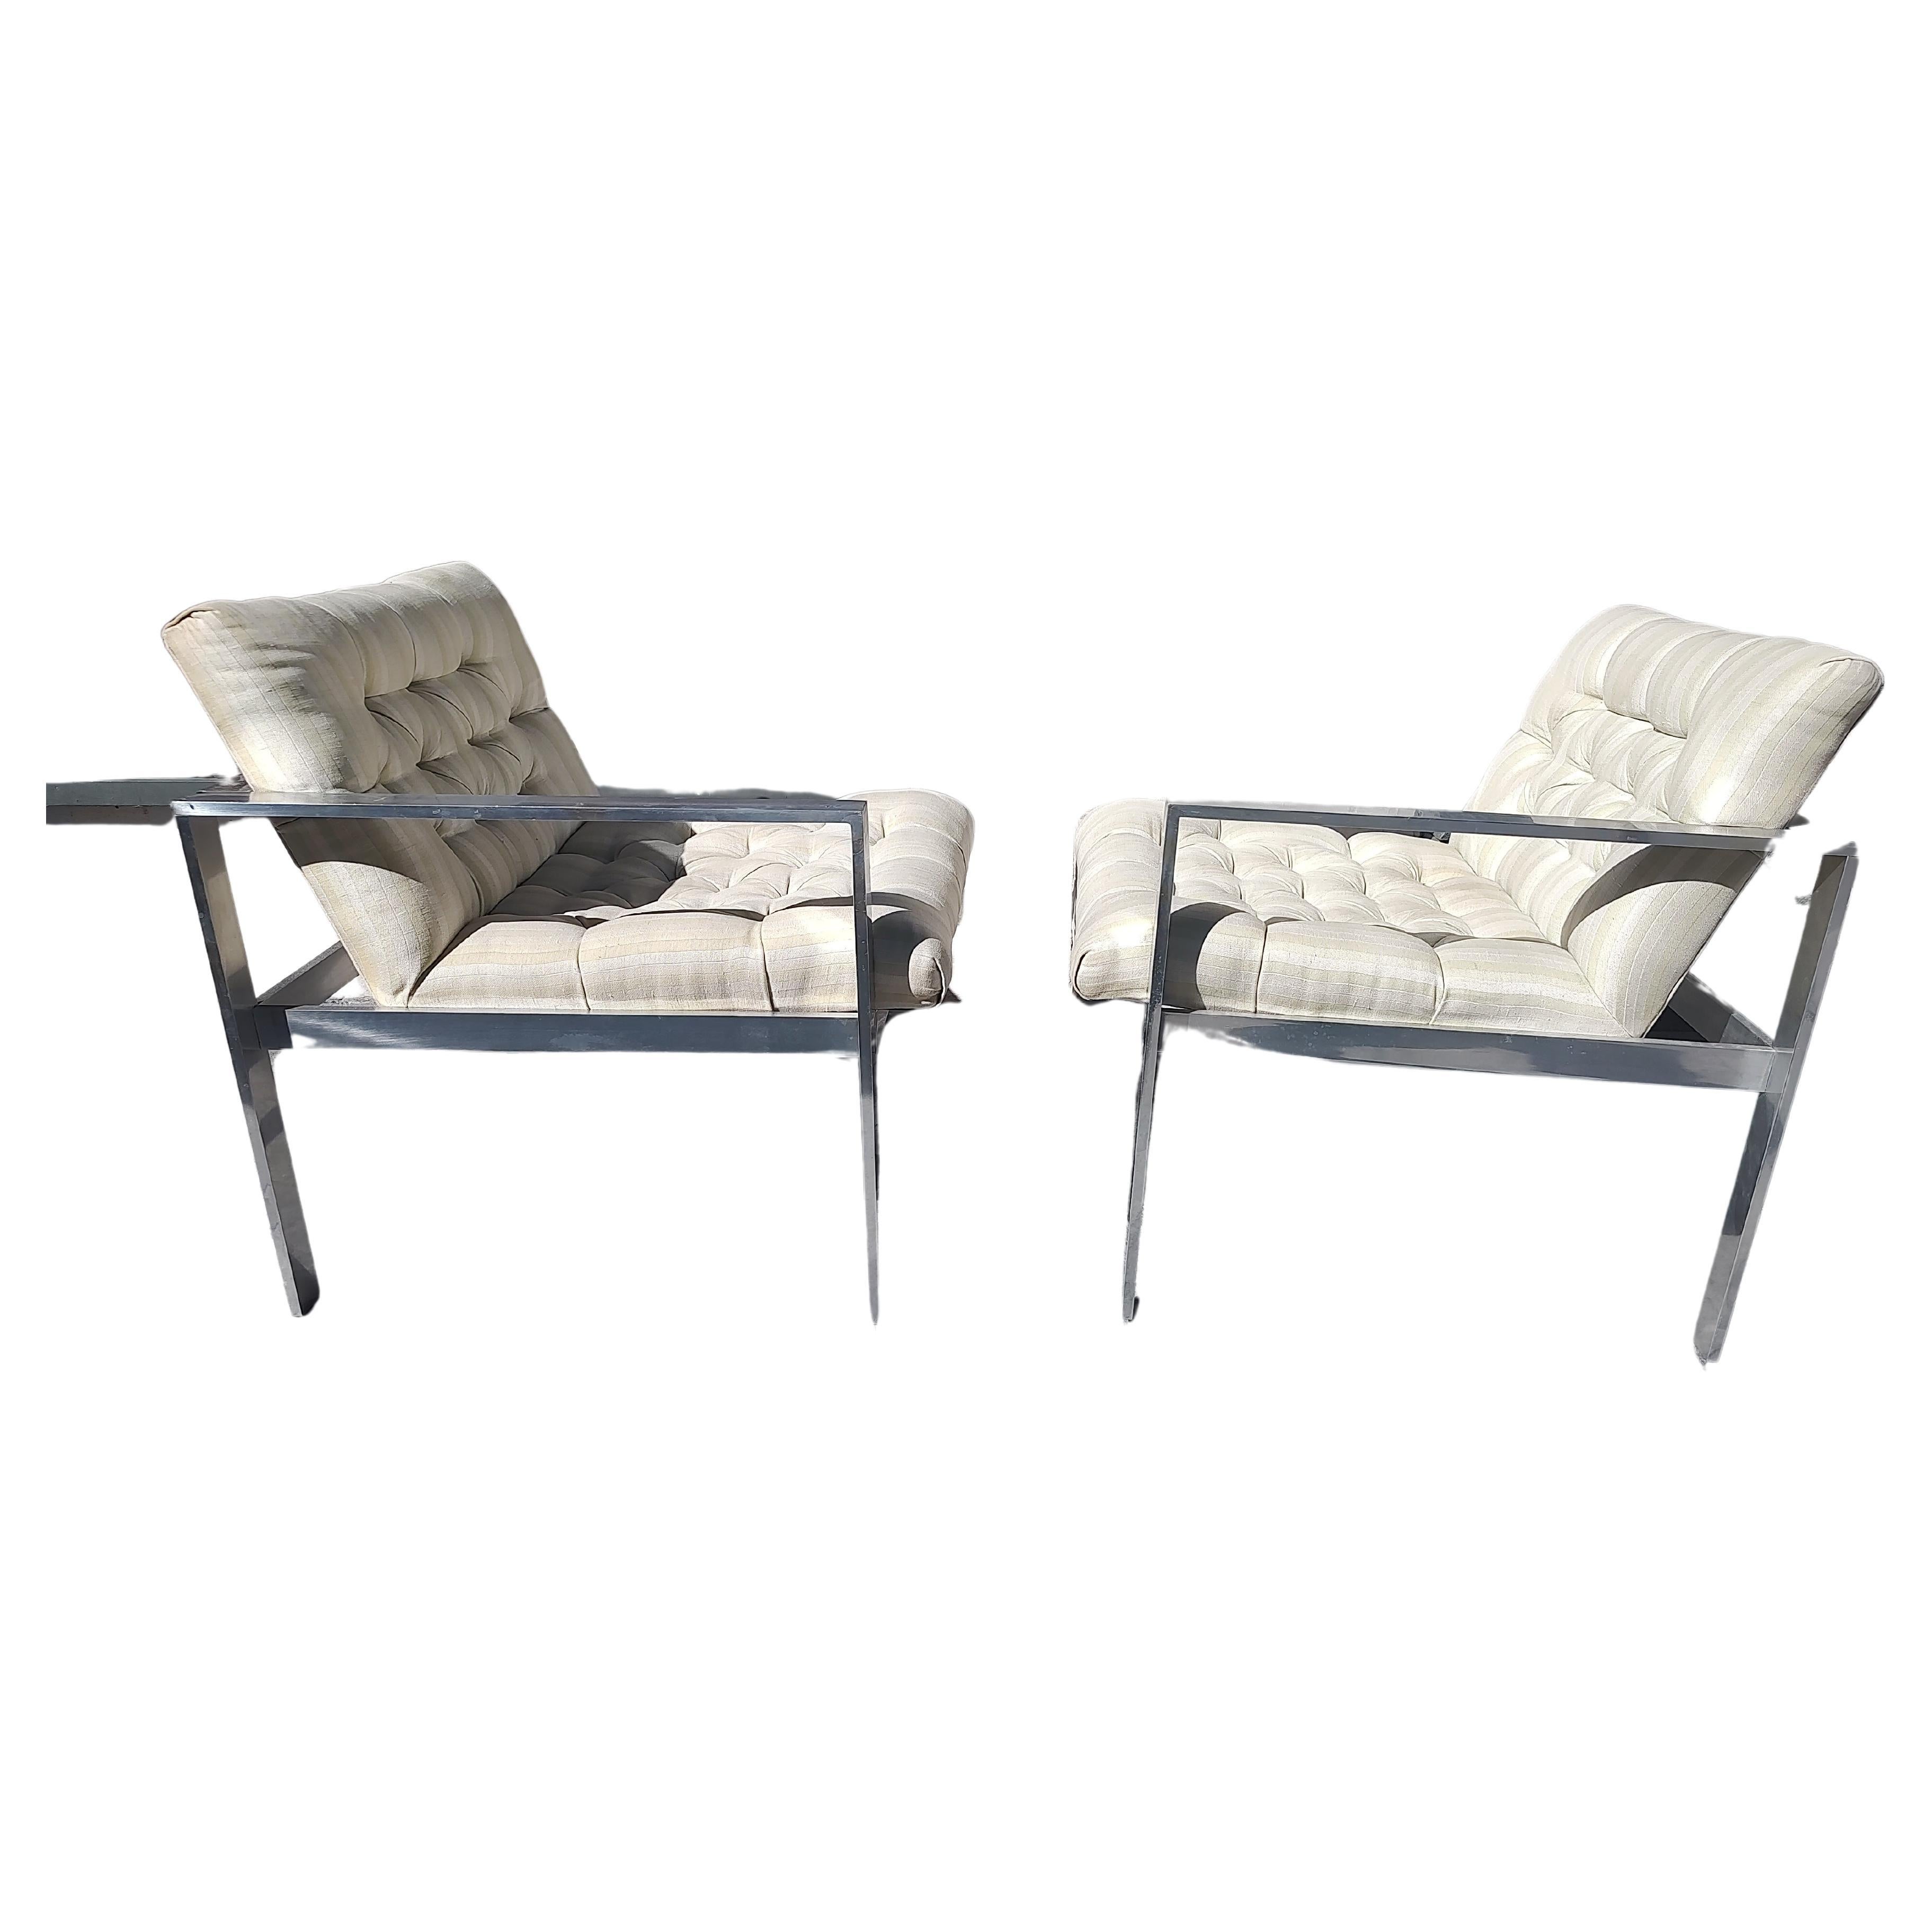 Pair of Mid-Century Modern Tufted Aluminum Lounge Chairs by Harvey Probber For Sale 6